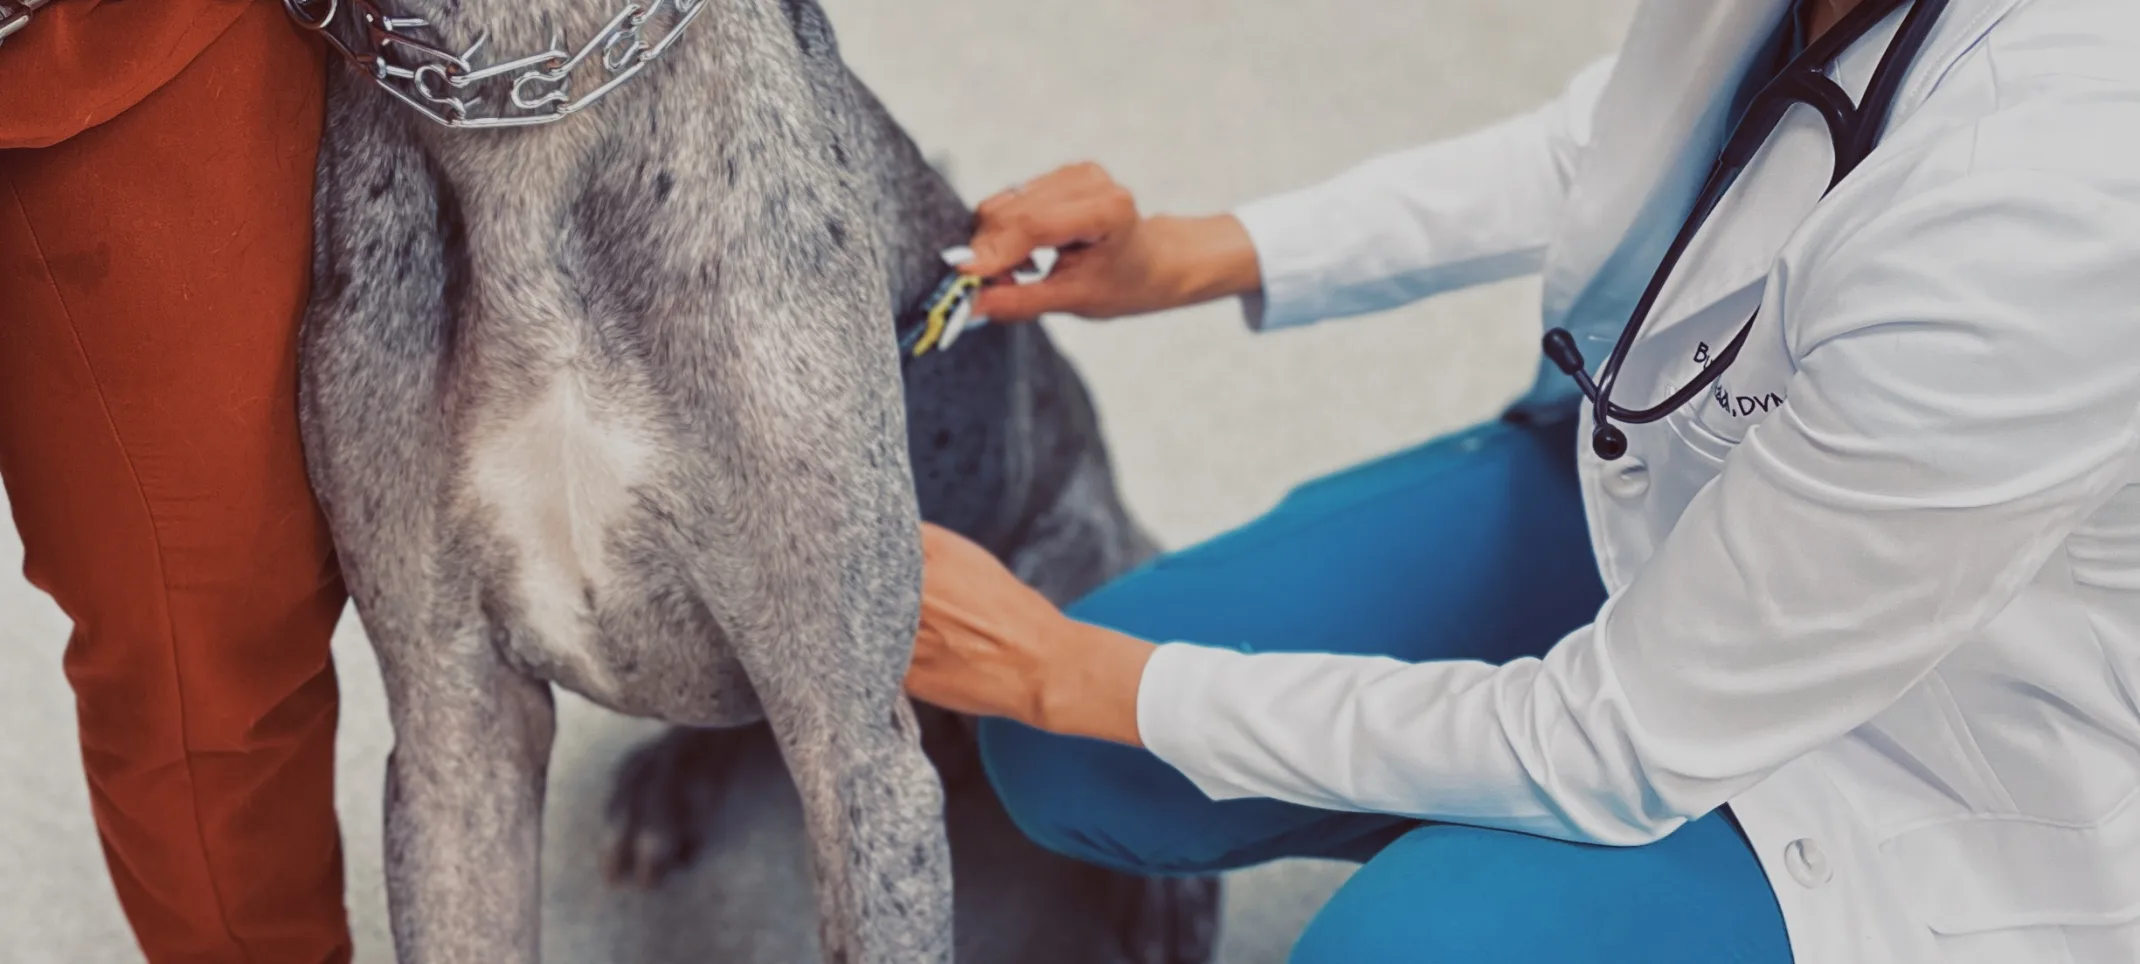 A White dog sitting while being handled and cared for by two veterinarians. 